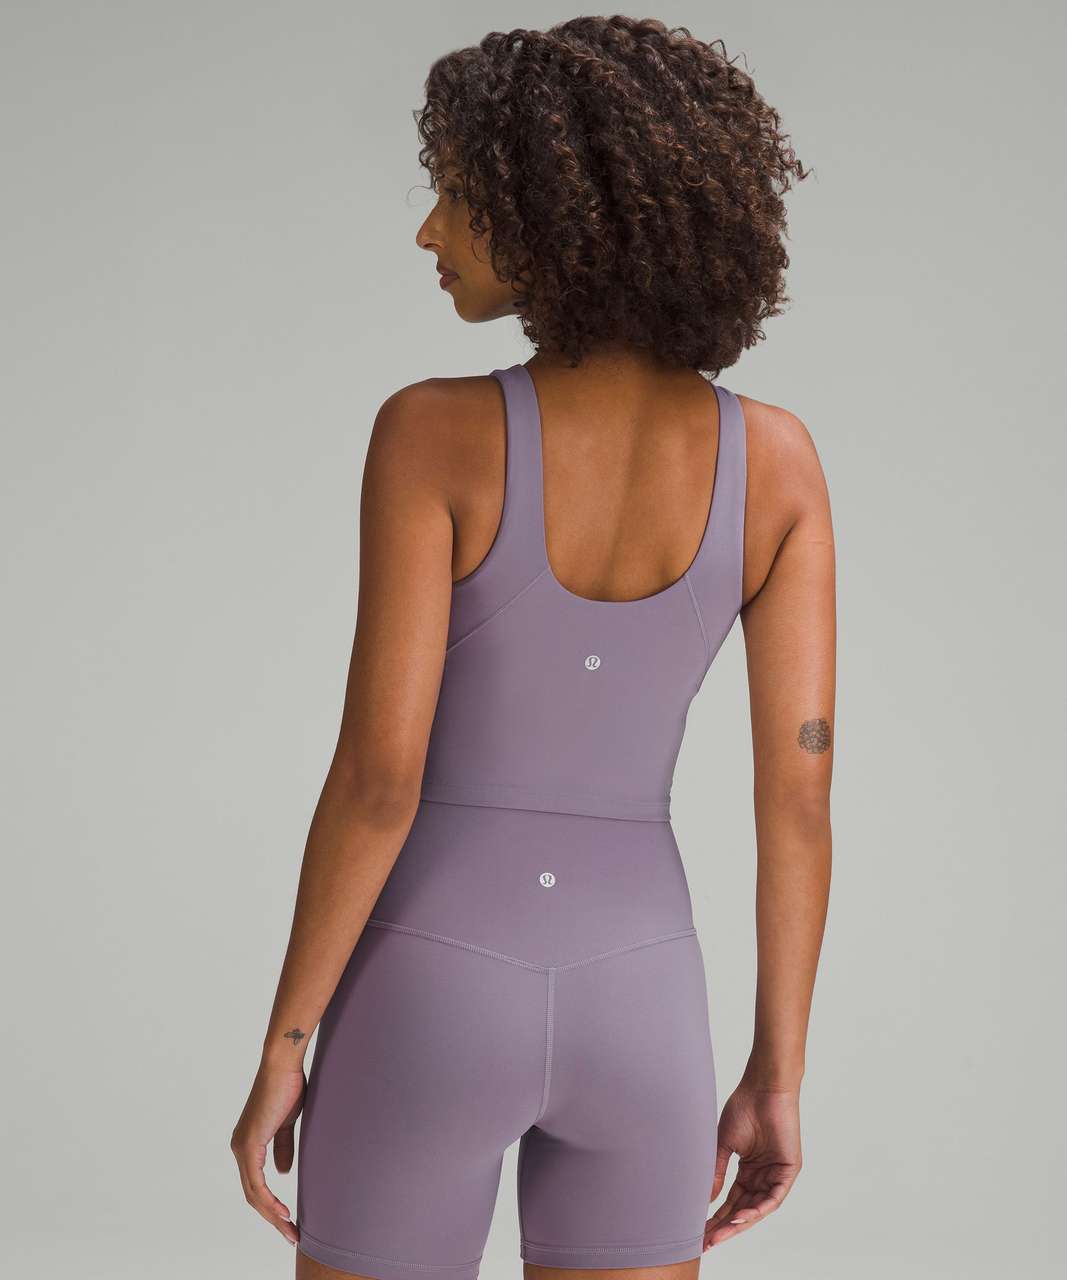 image trick finds] ETS crop / align waist tank (icing blue), align waist rb  tank (ft lavender, water drop), instill tank (water drop), love tank (grn  foliage), LAC high-neck (gull gry, pnk